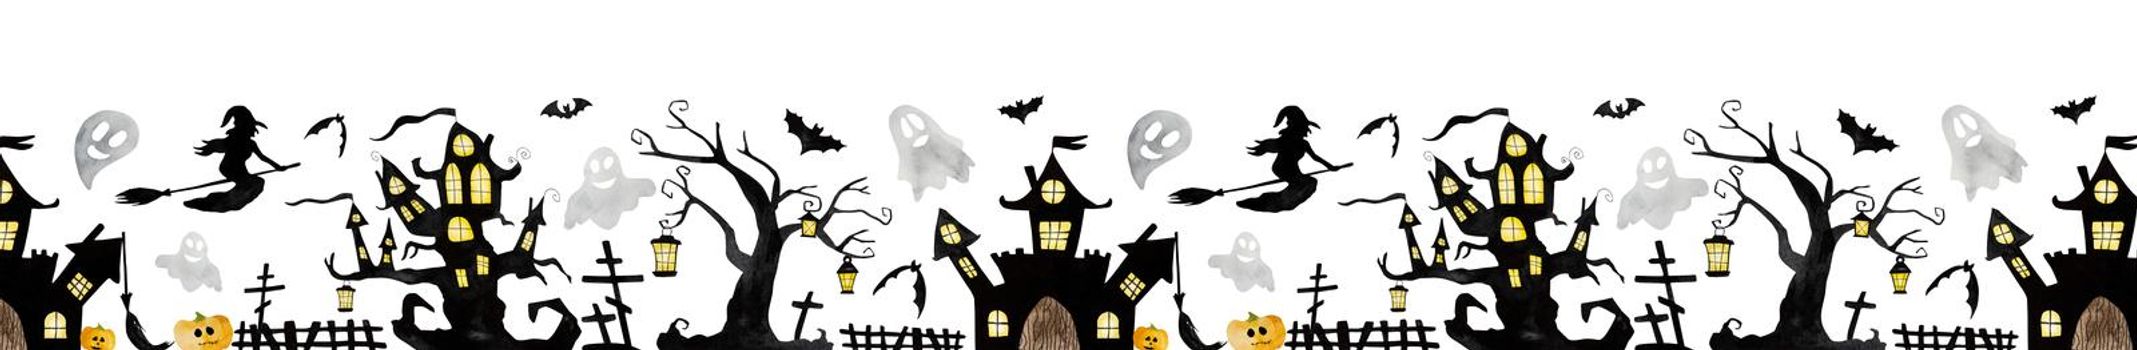 Halloween watercolor illustration with witch, tree house and bats silhouette seamless pattern. October autumn holiday of mystery